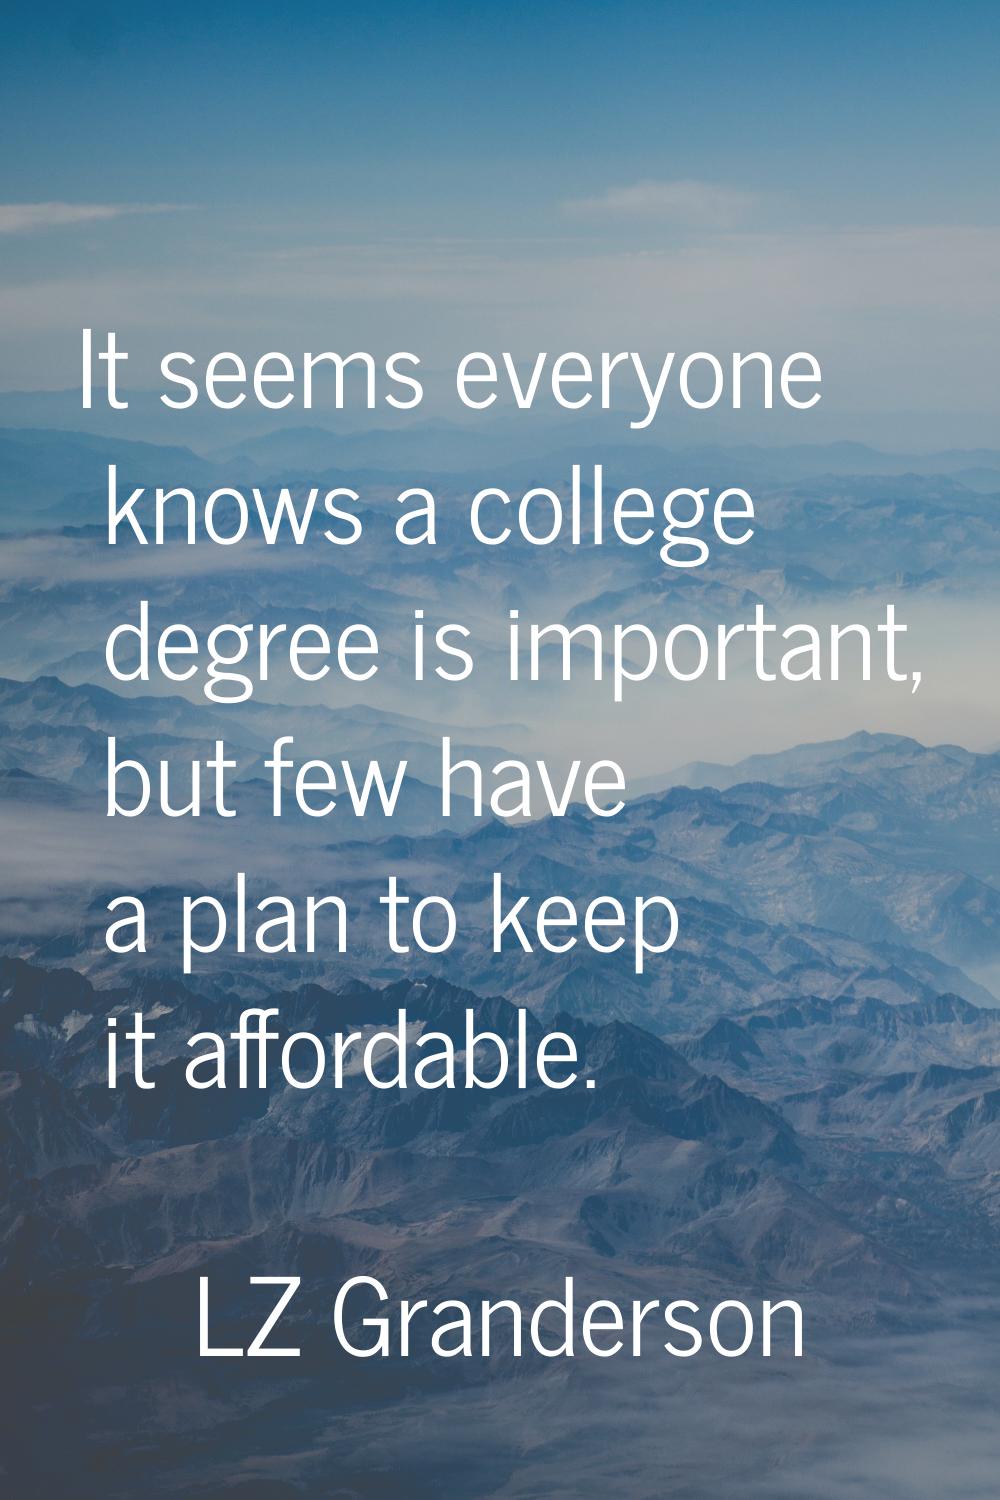 It seems everyone knows a college degree is important, but few have a plan to keep it affordable.